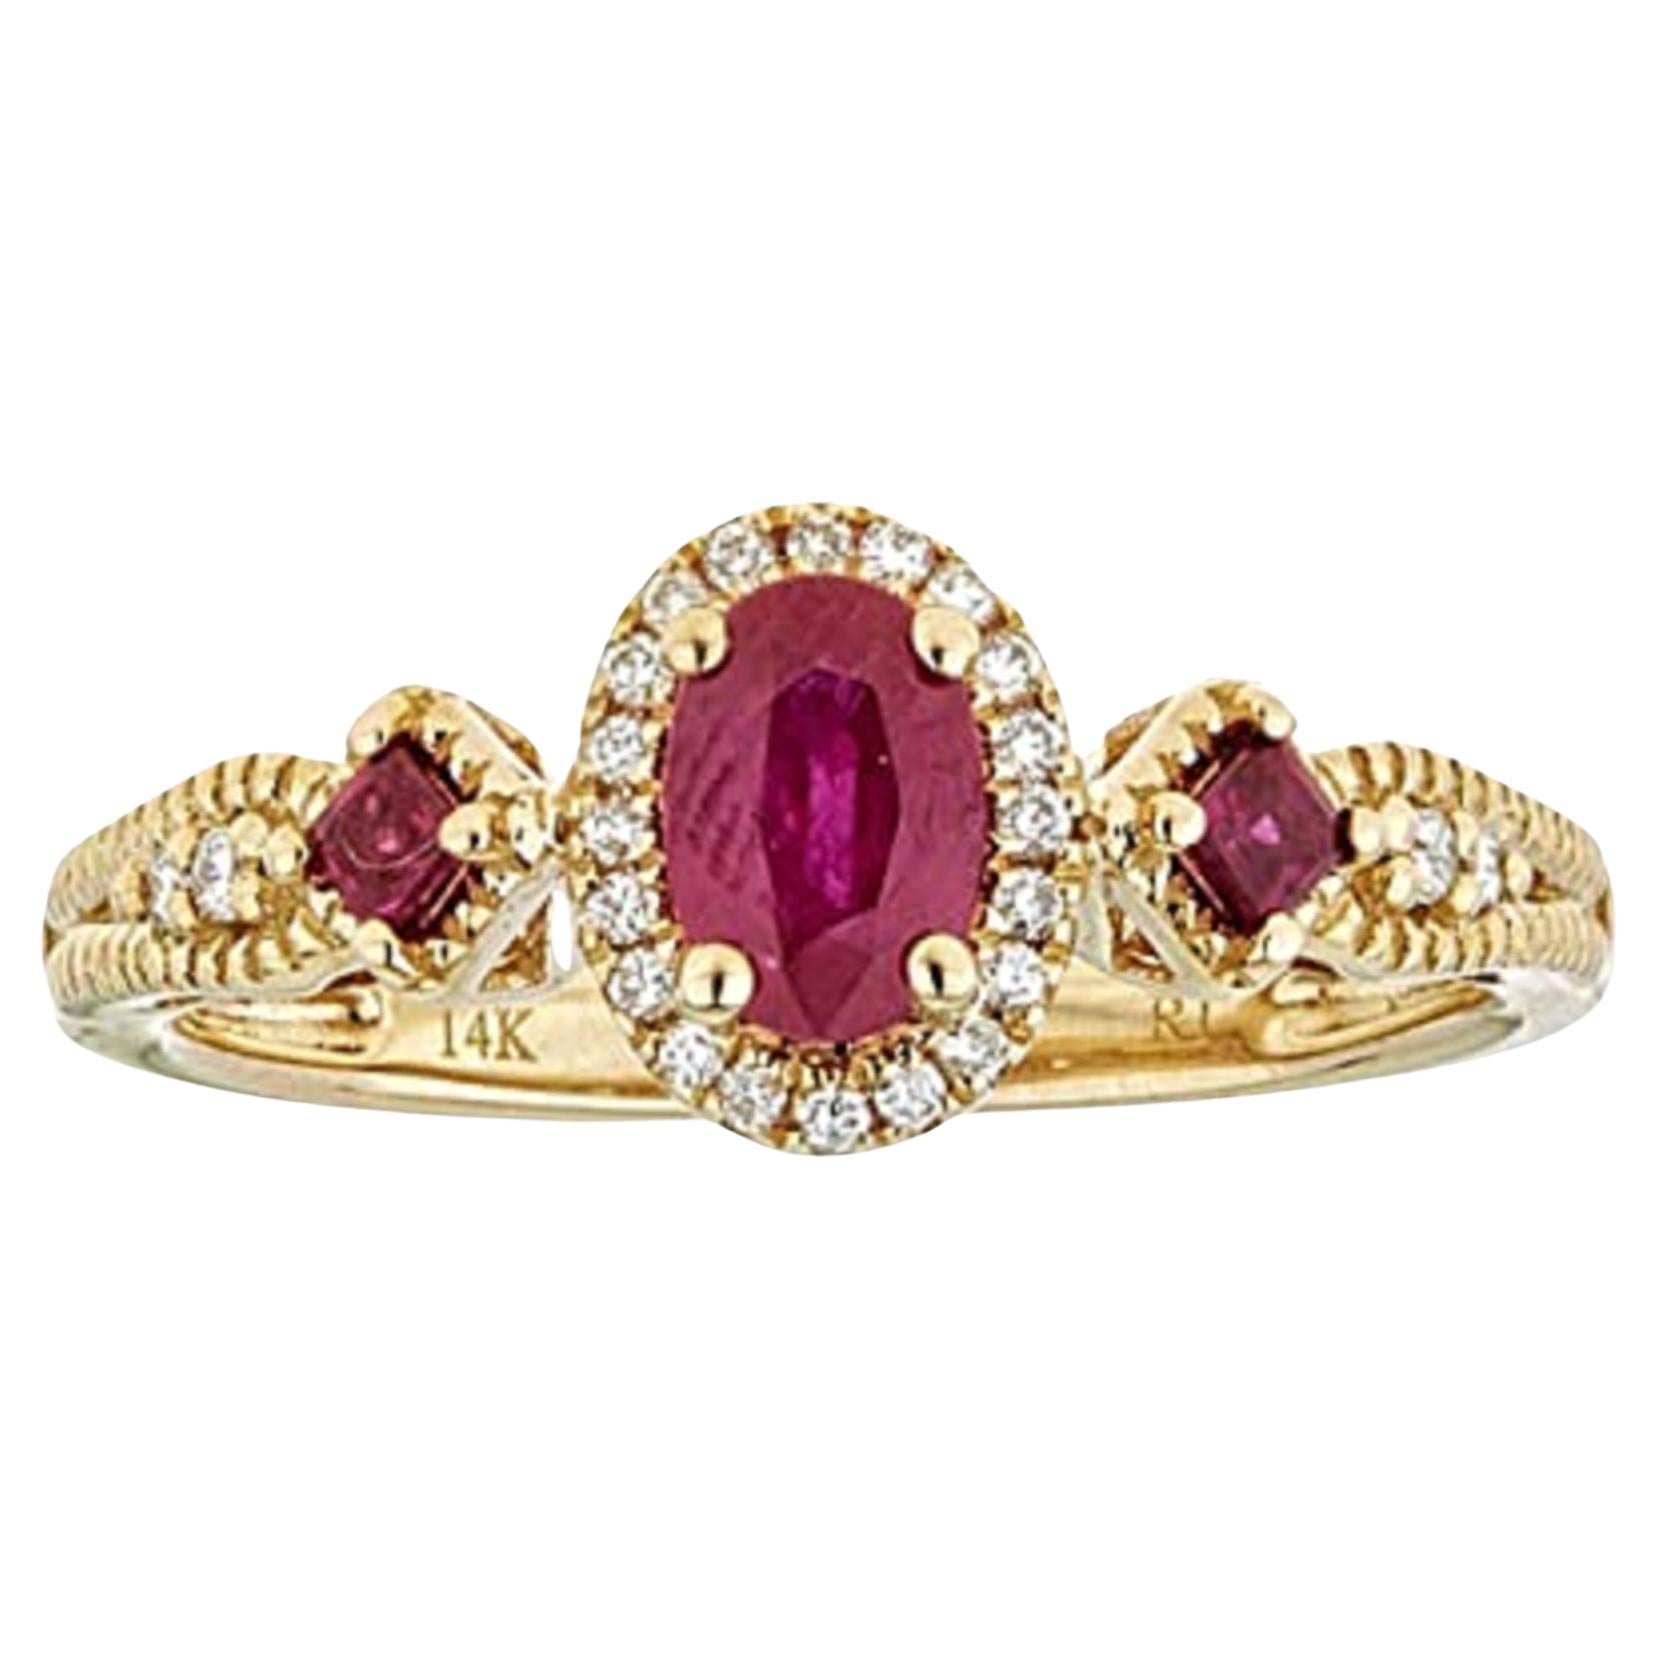 Oval, Square-cut Ruby Diamond accents 14K Yellow Gold Ring